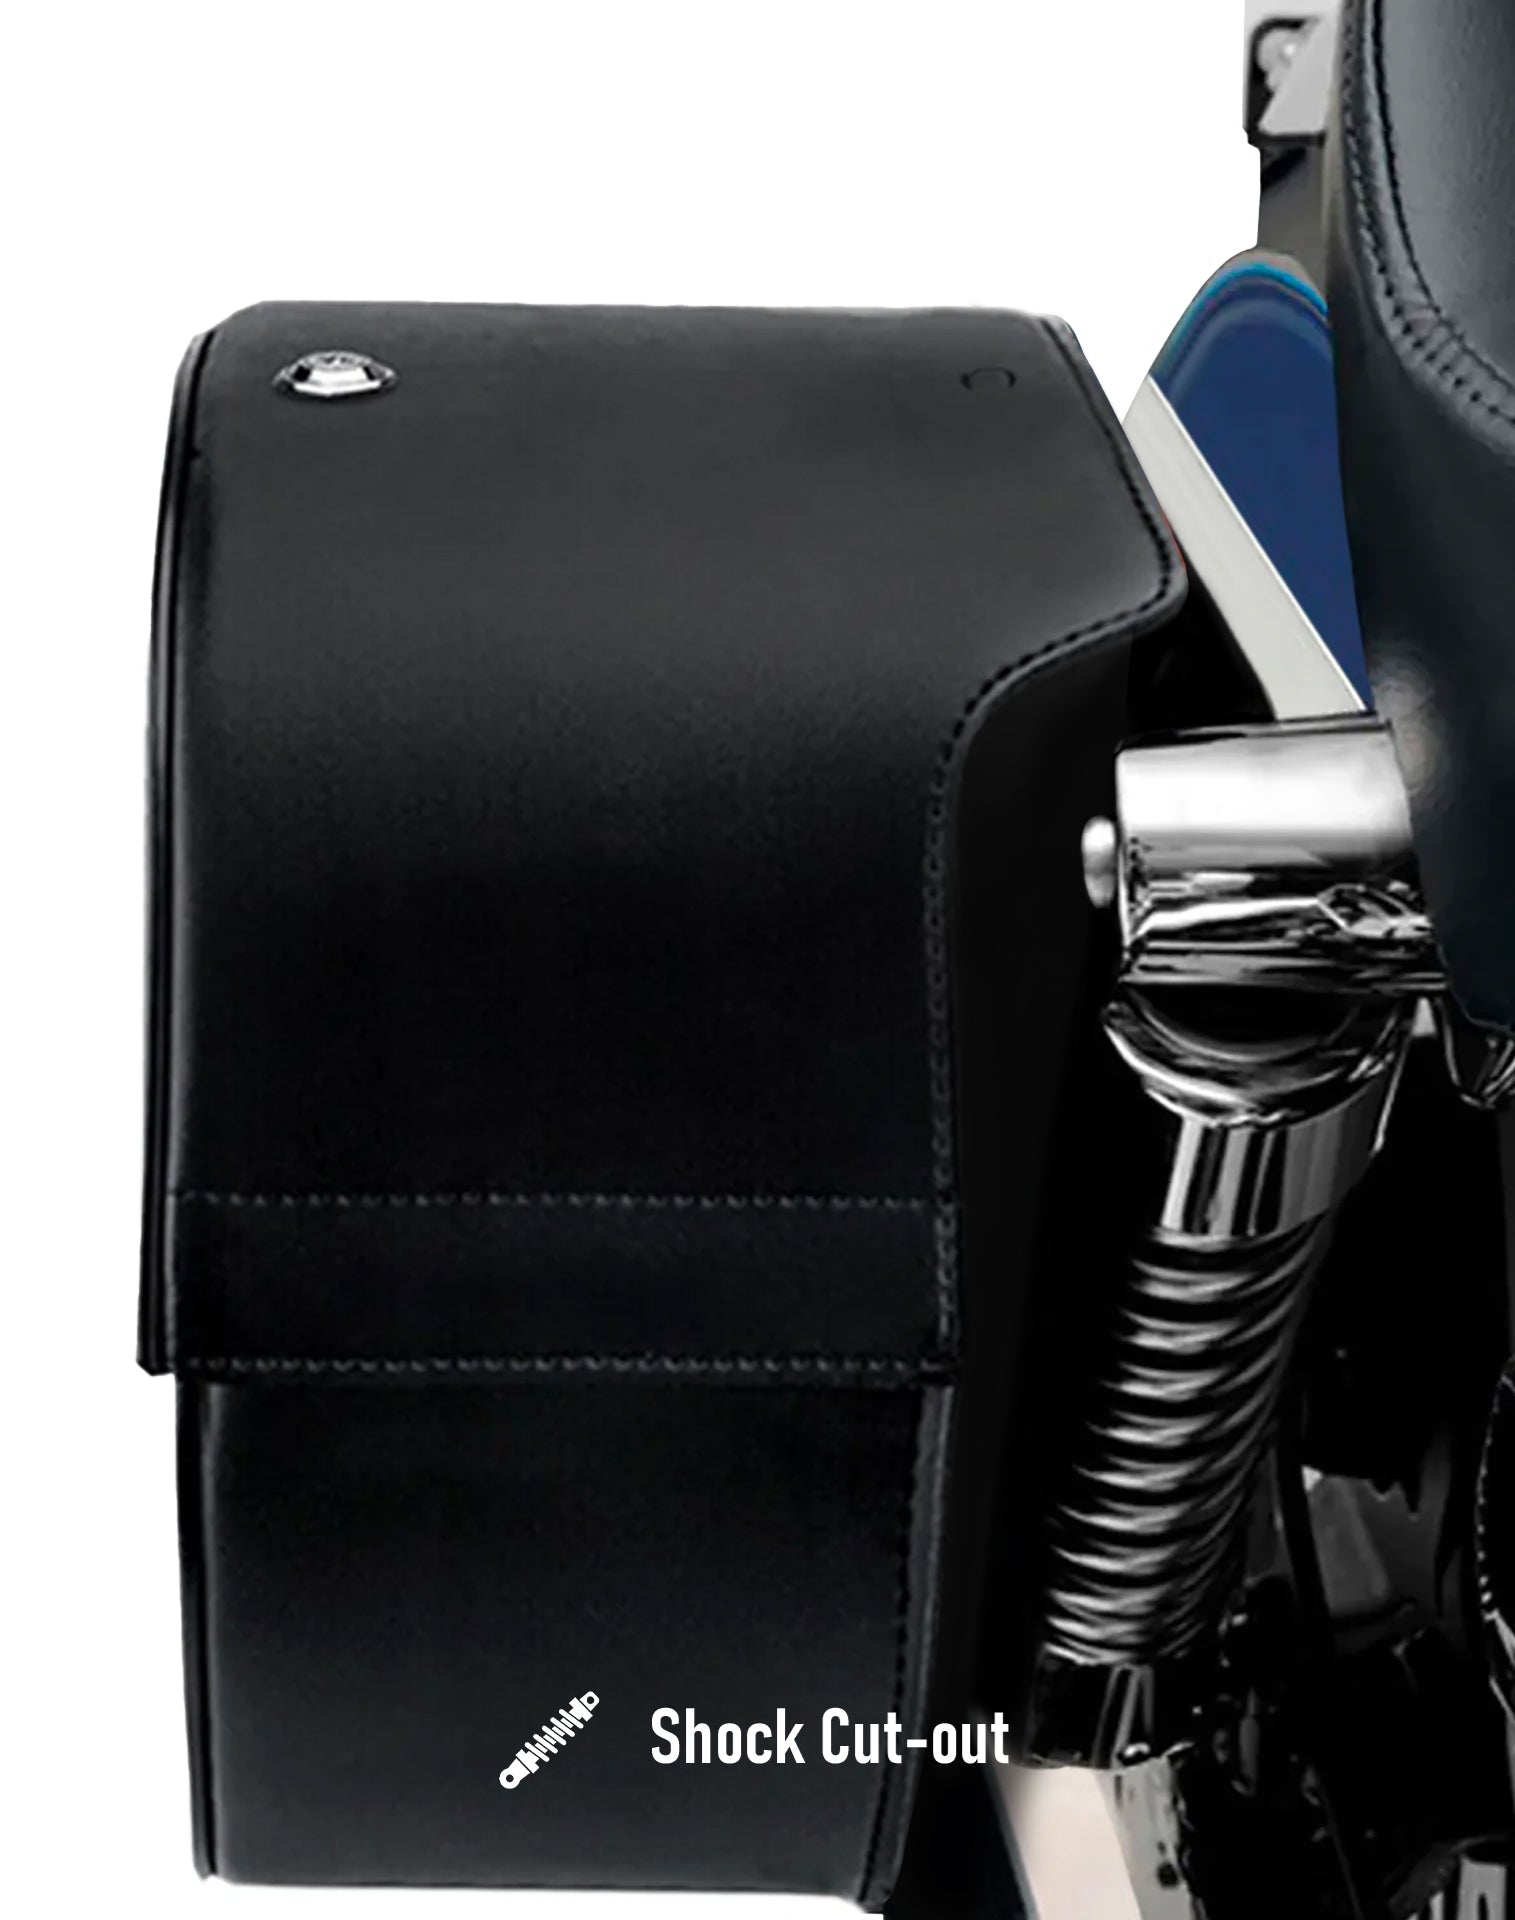 26L - Warrior Large Shock Cut-out Leather Motorcycle Saddlebags for Harley Dyna Fat Bob FXDF/SE Hard Shell Construction